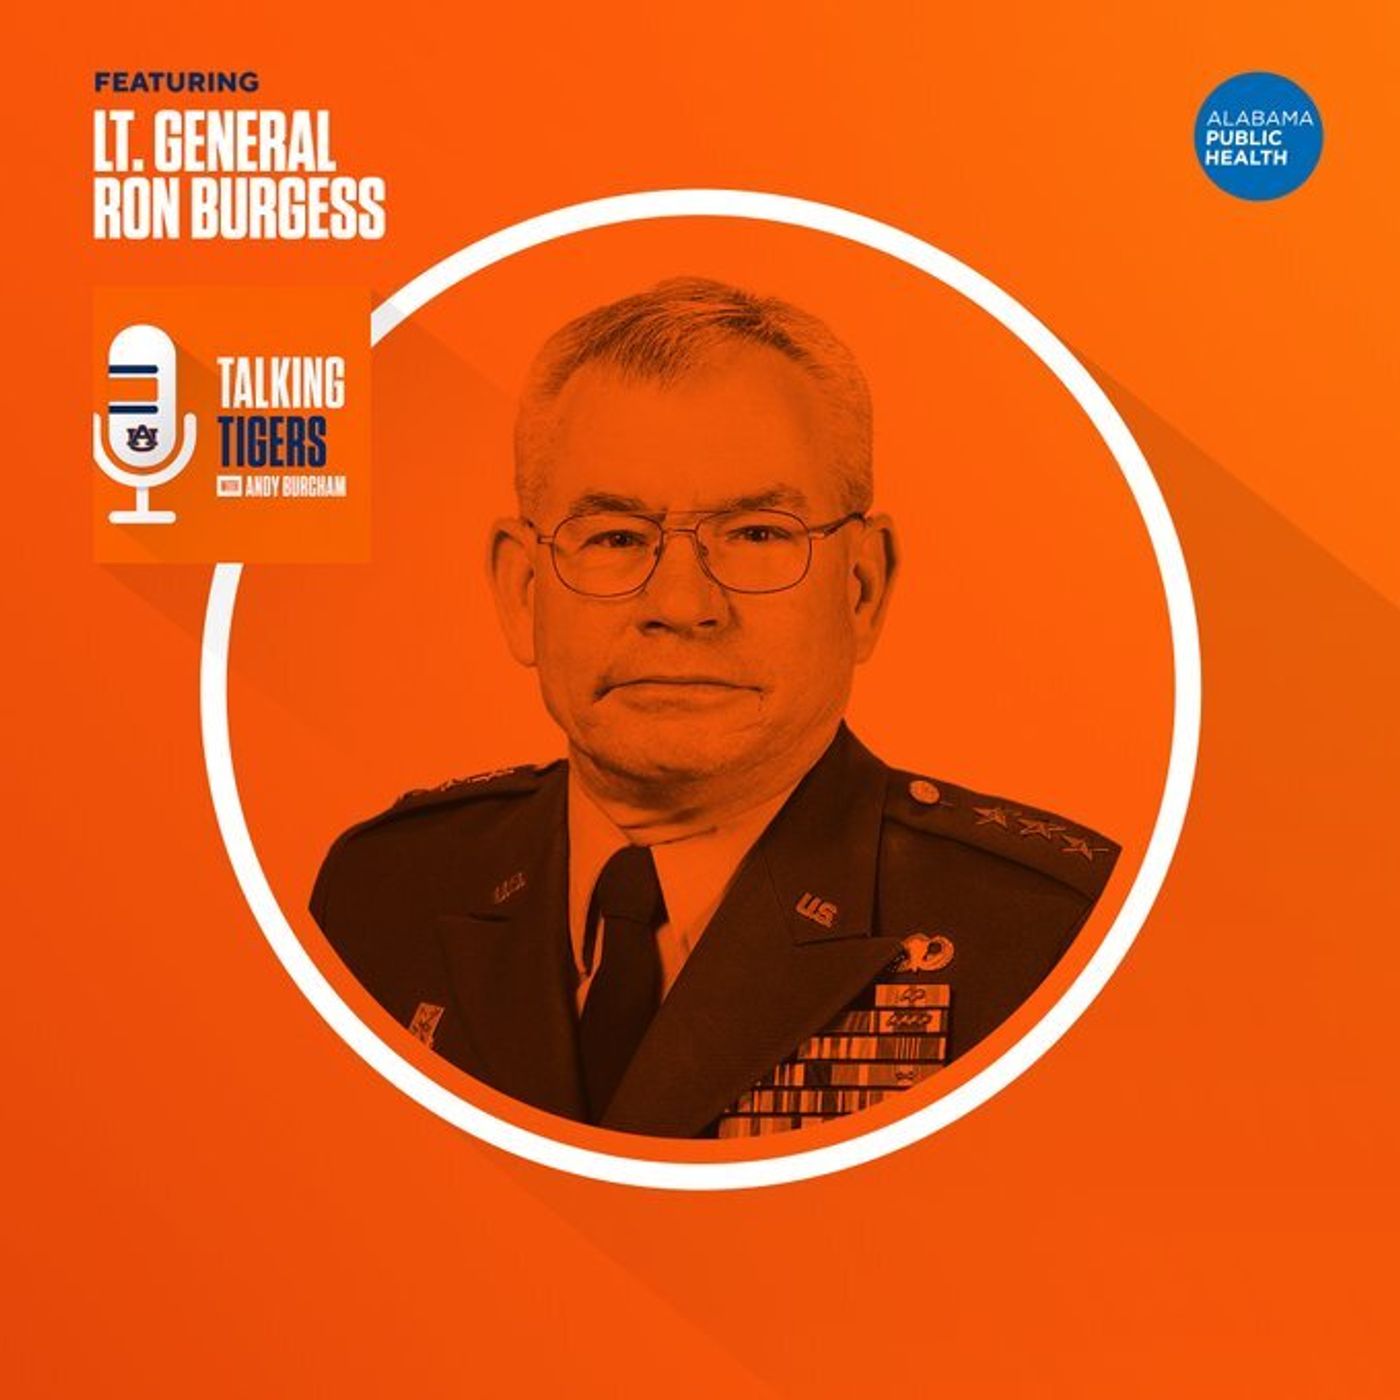 Talking Tigers Podcast with Andy Burcham-Ret. Lt. General Ron Burgess